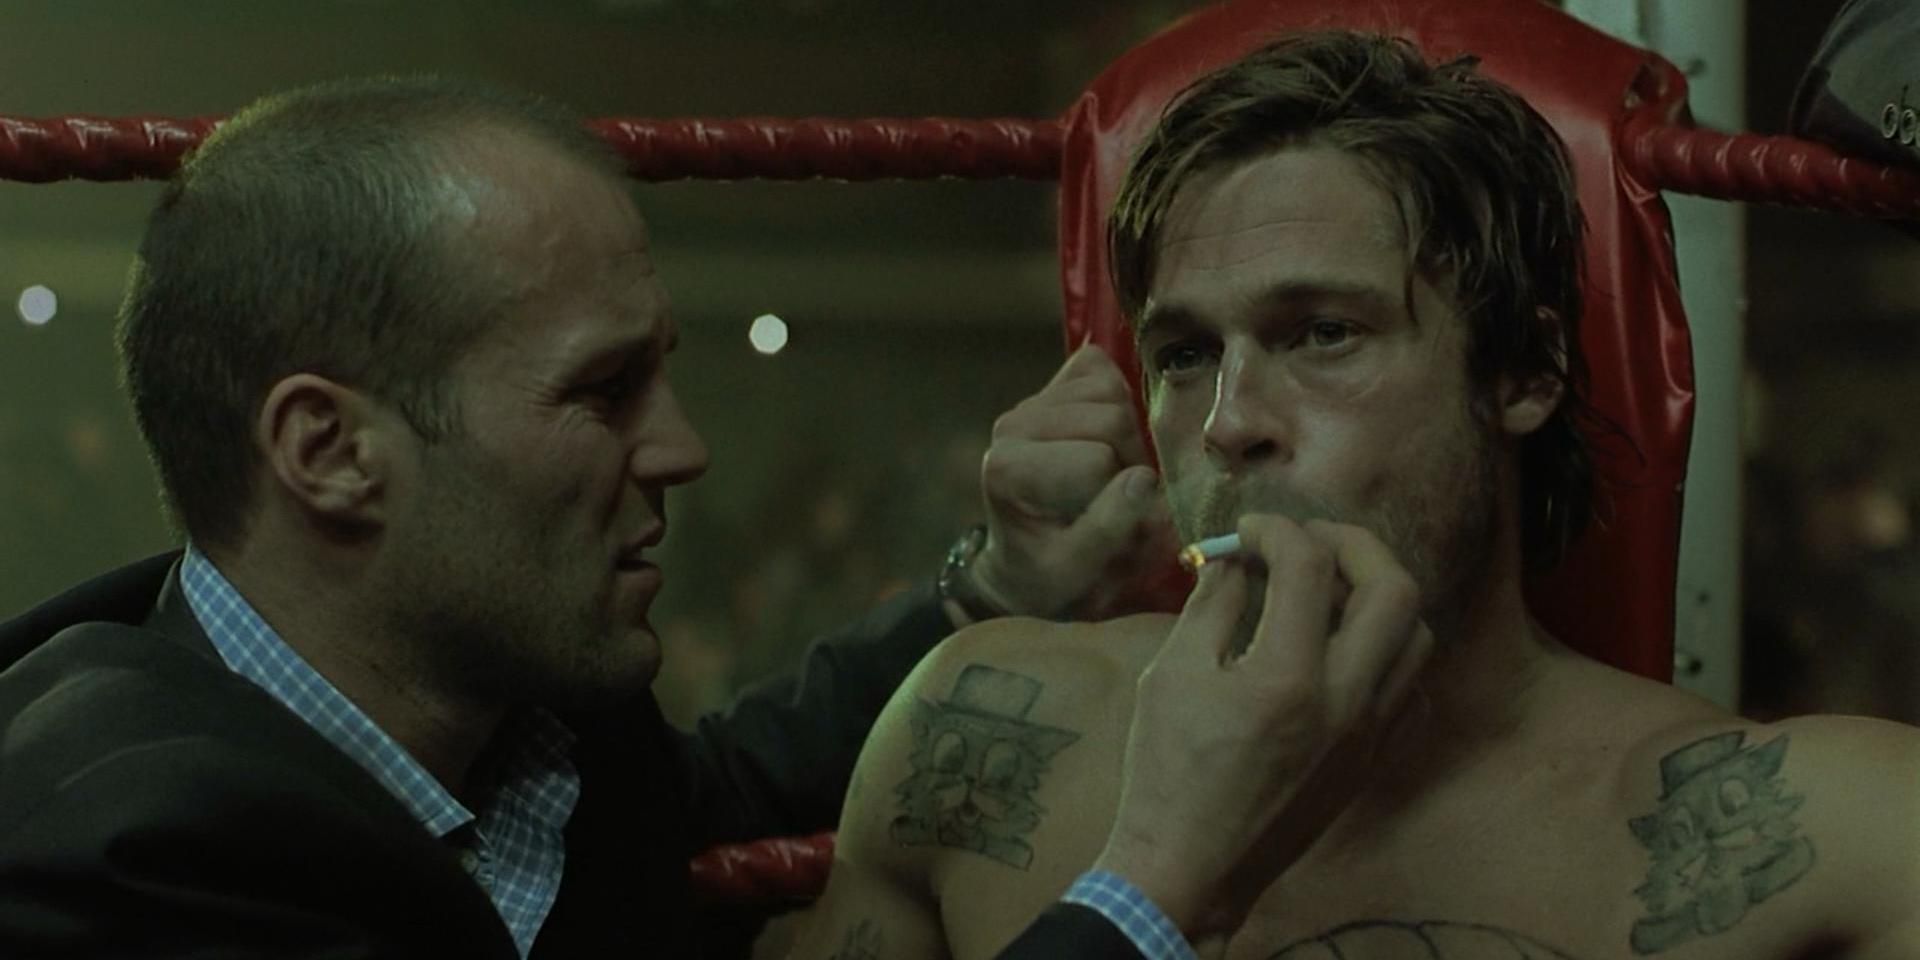 Turkish giving Mickey a cigarette in the ring in Snatch 2000